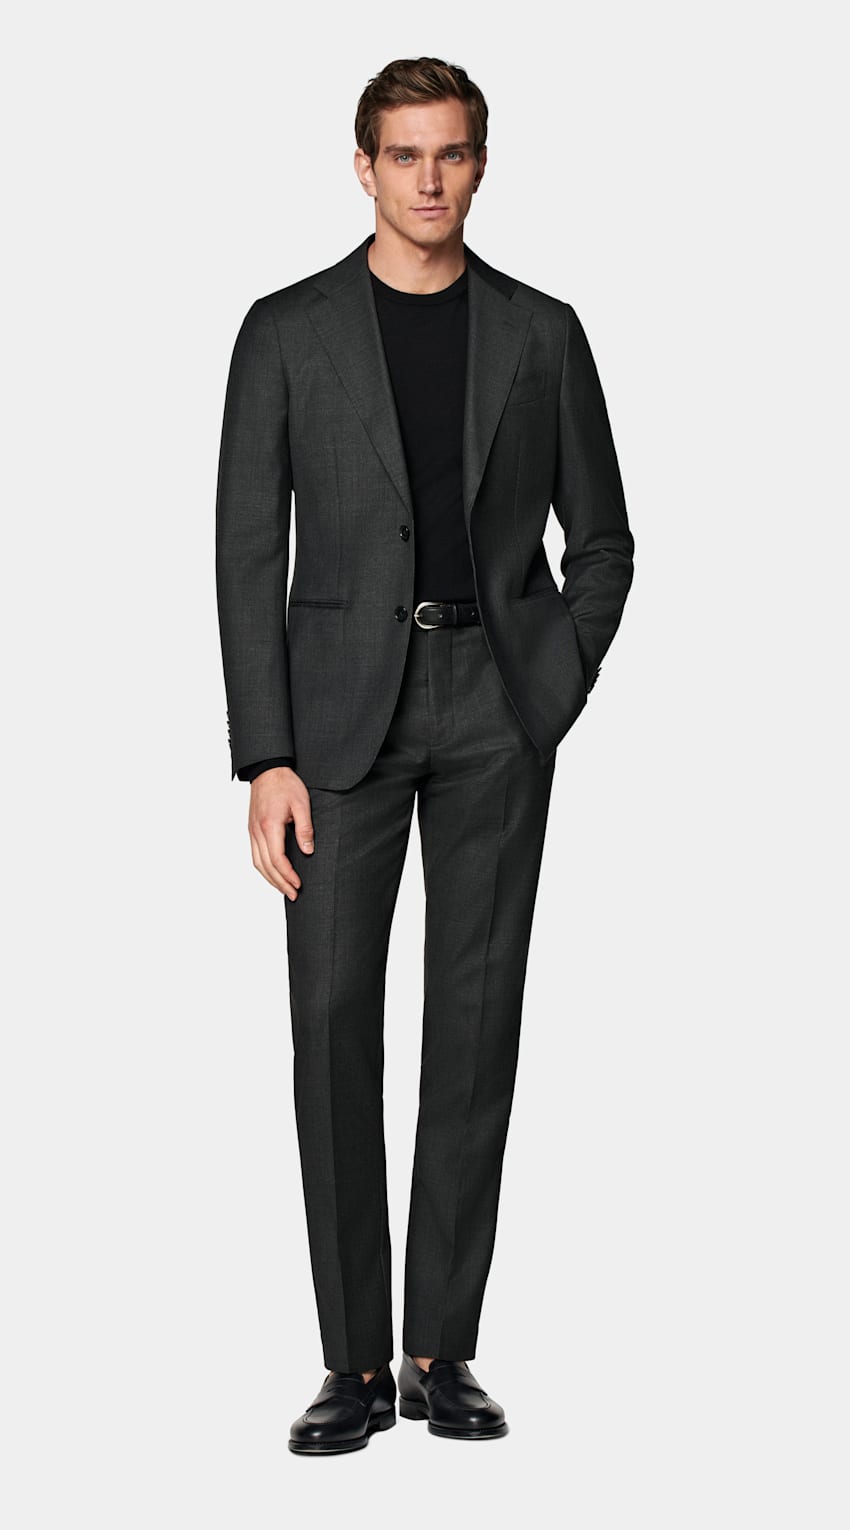 SUITSUPPLY All Season Pure S110's Wool by Vitale Barberis Canonico, Italy Dark Grey Tailored Fit Havana Suit Jacket